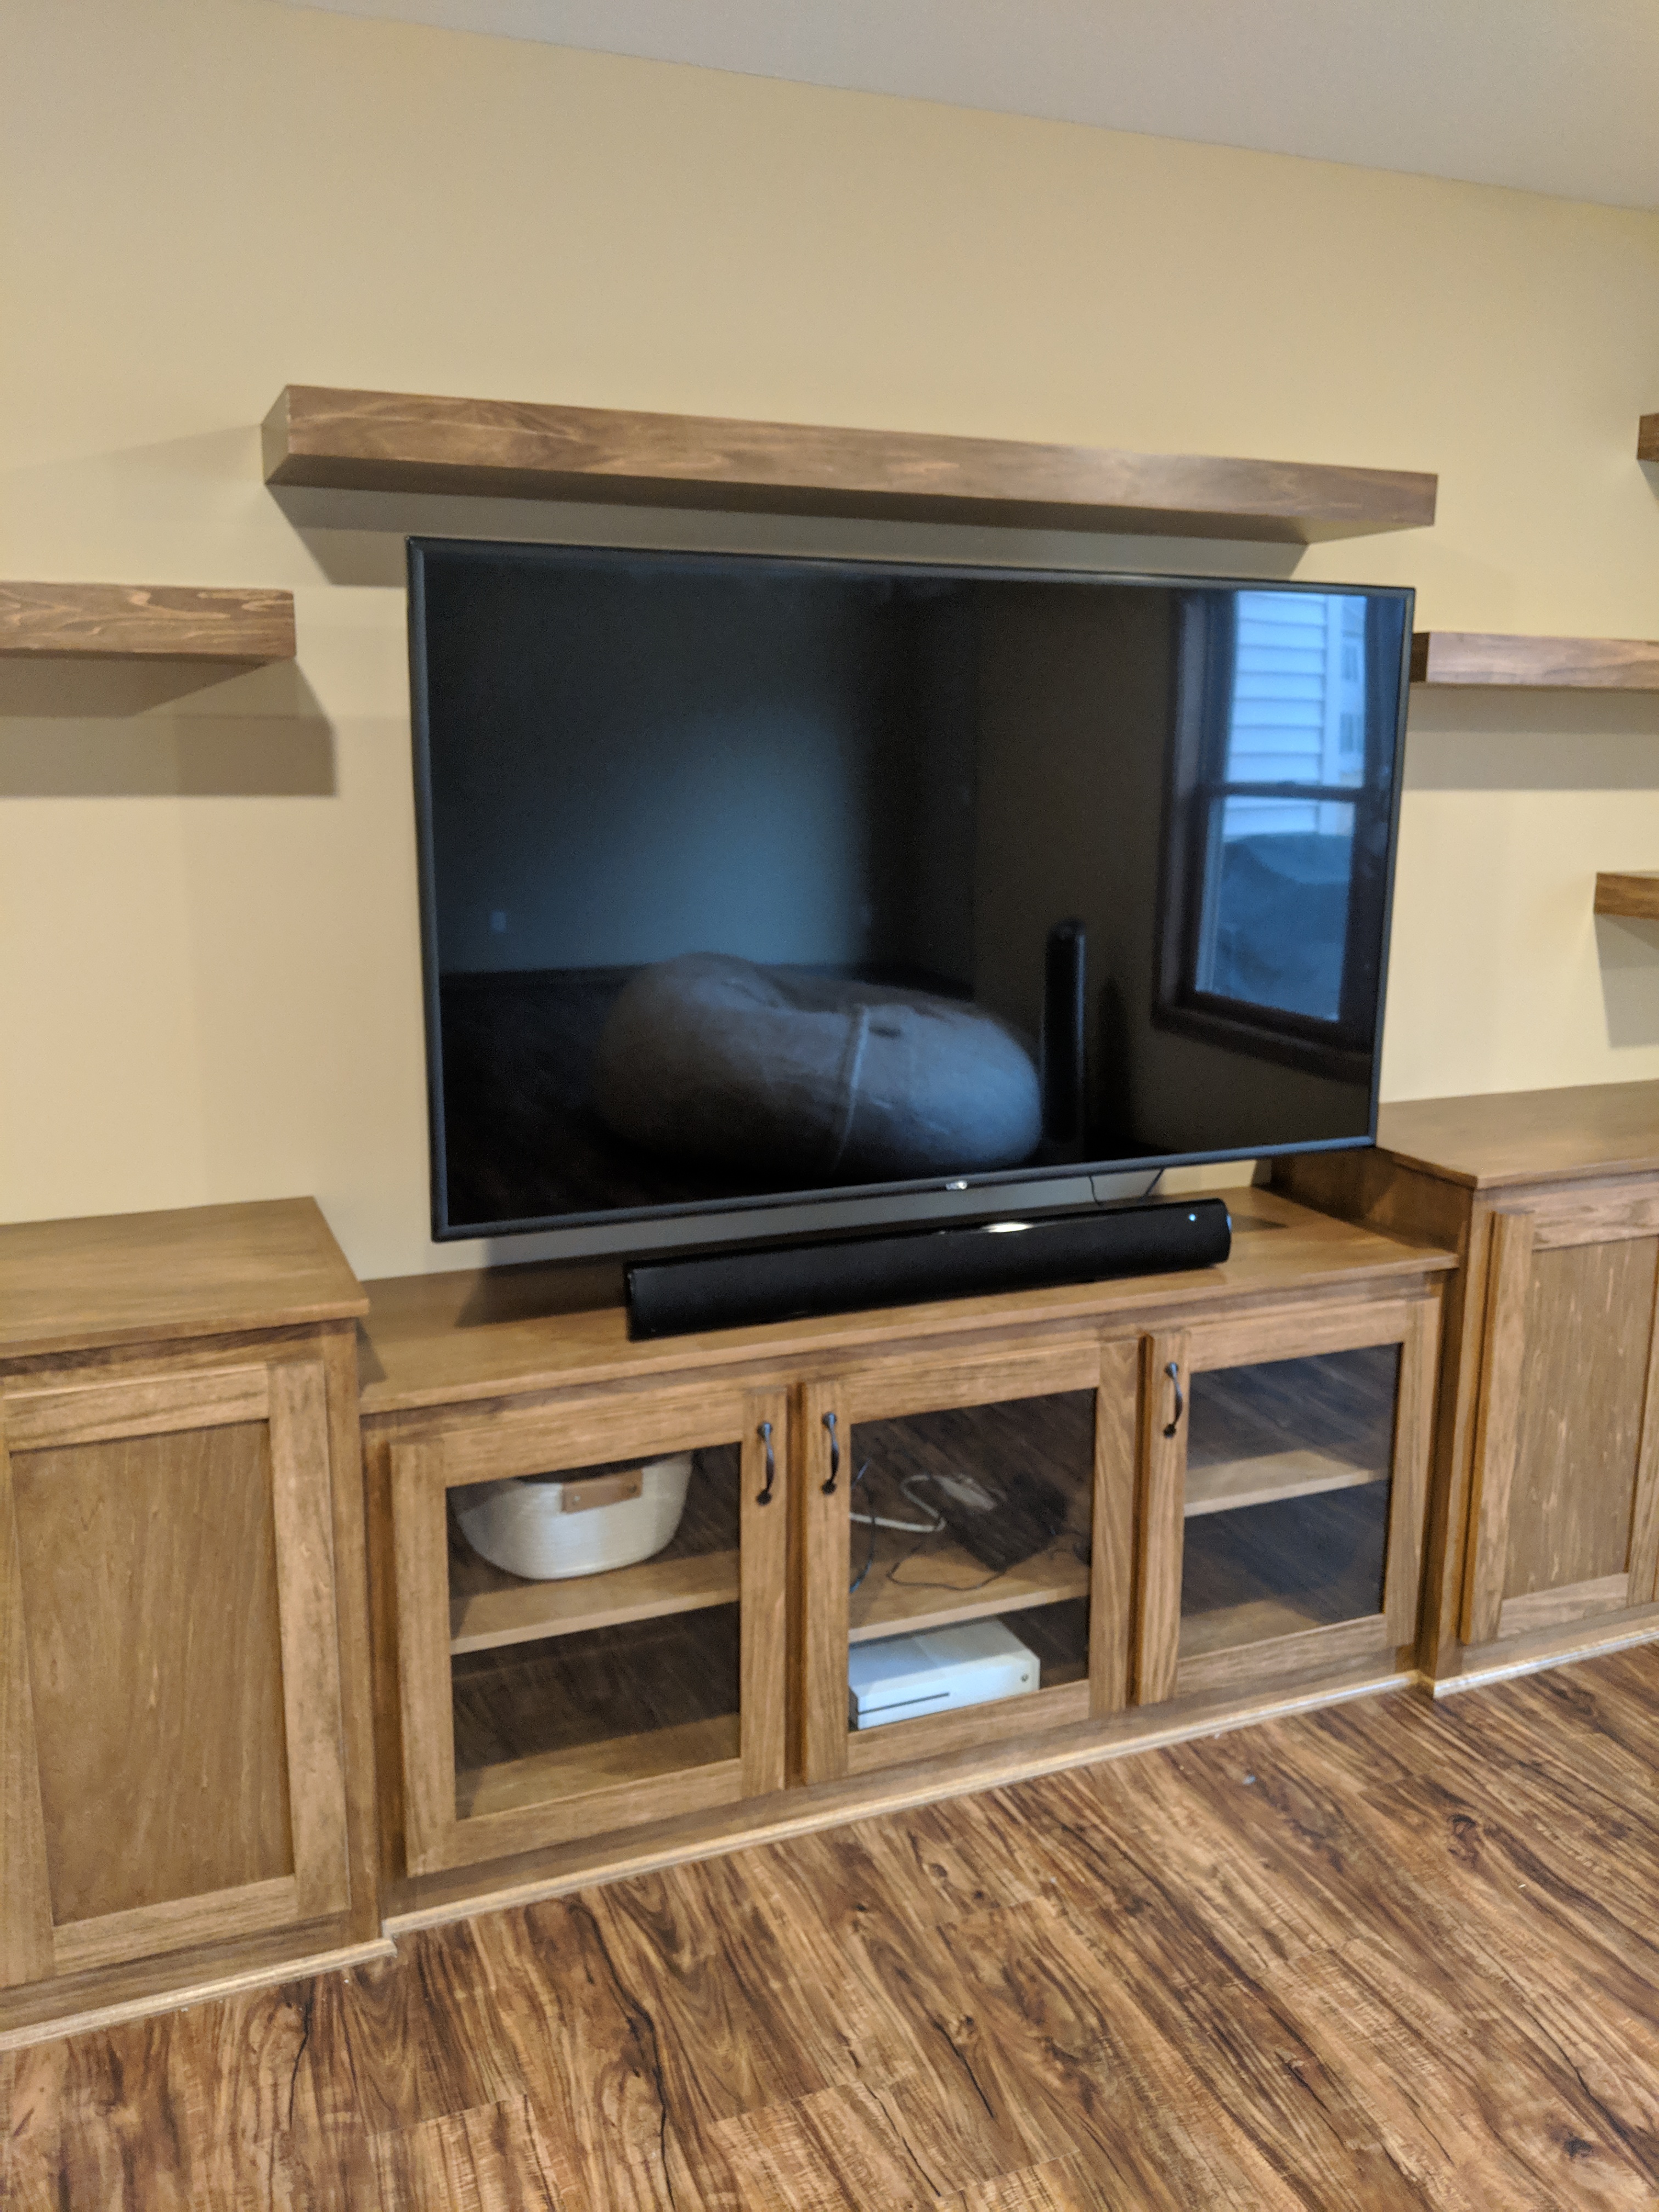 Space for large flat Screen TV and component cabinets below